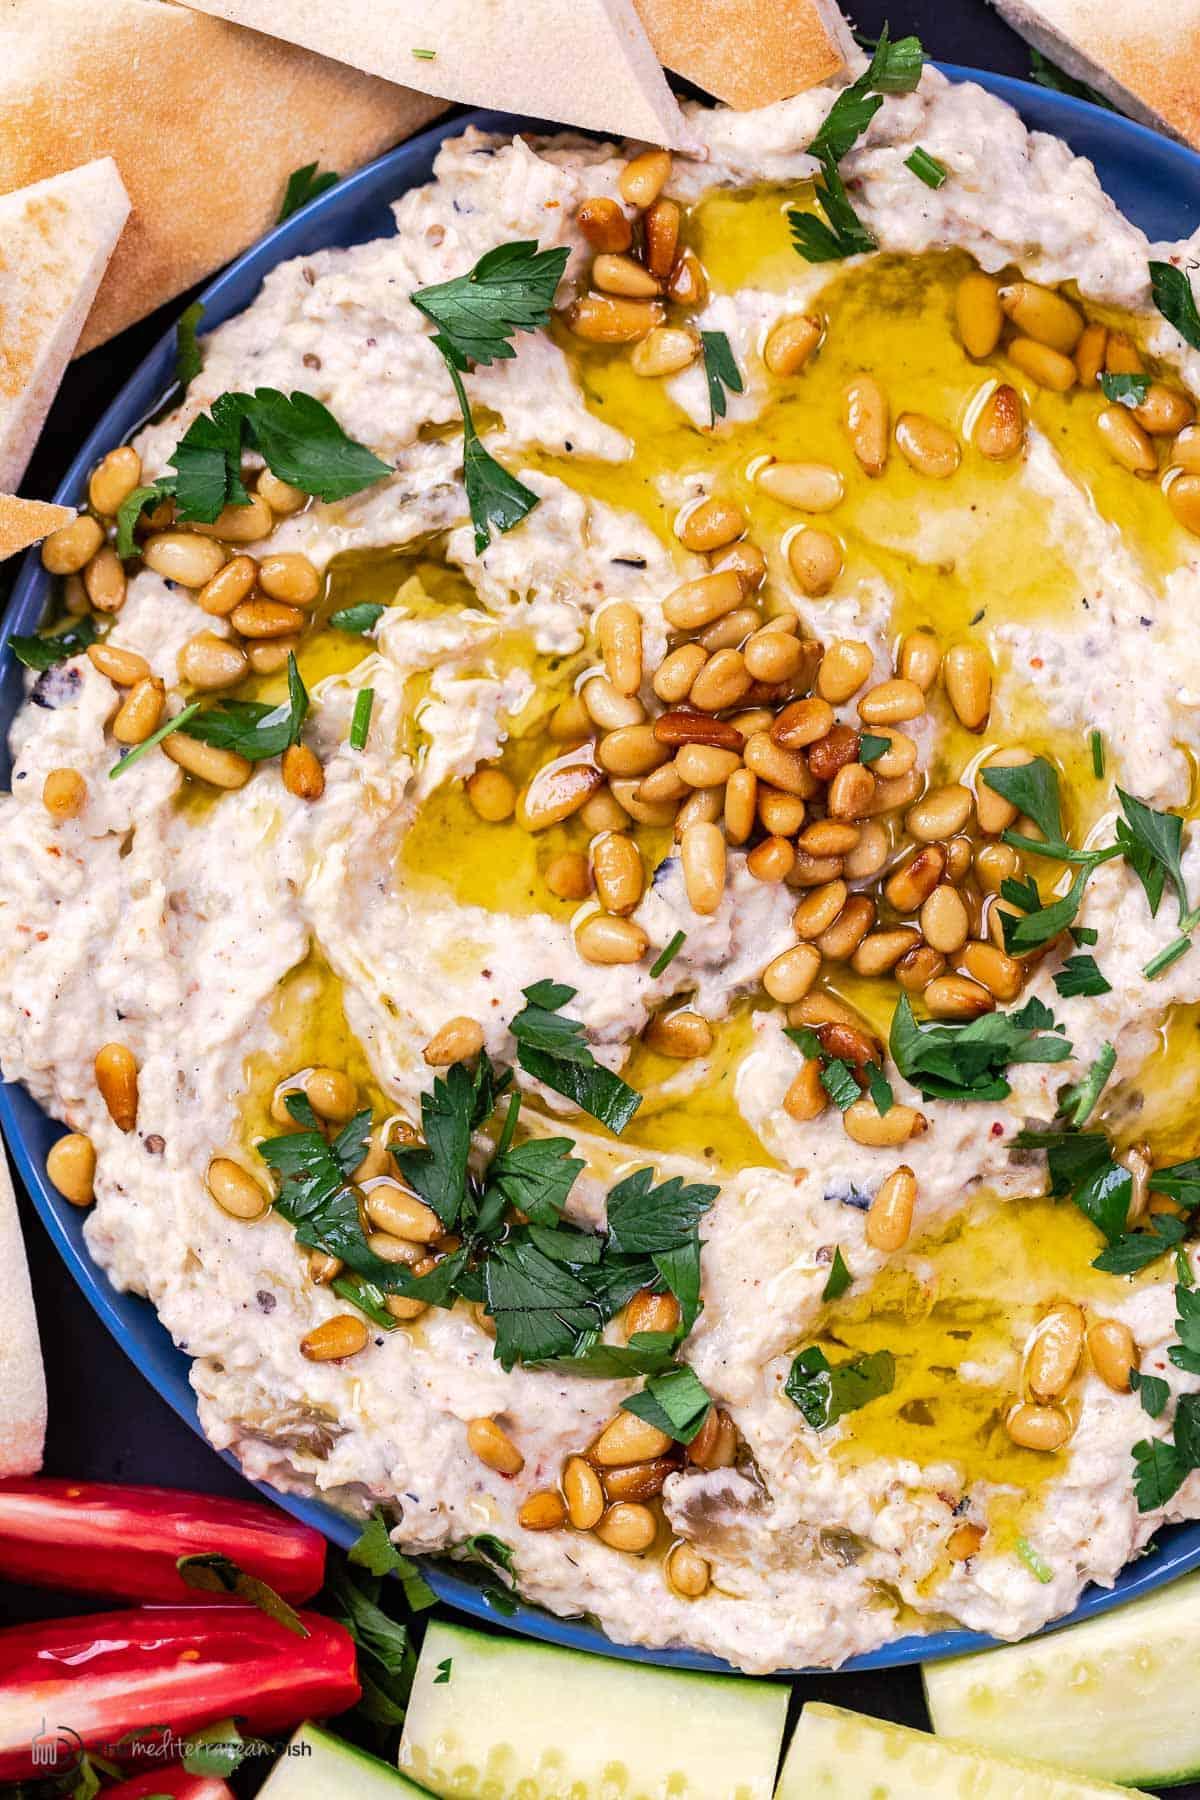 Tasty Lebanese Baba Ganoush with a Unique Sweet Touch